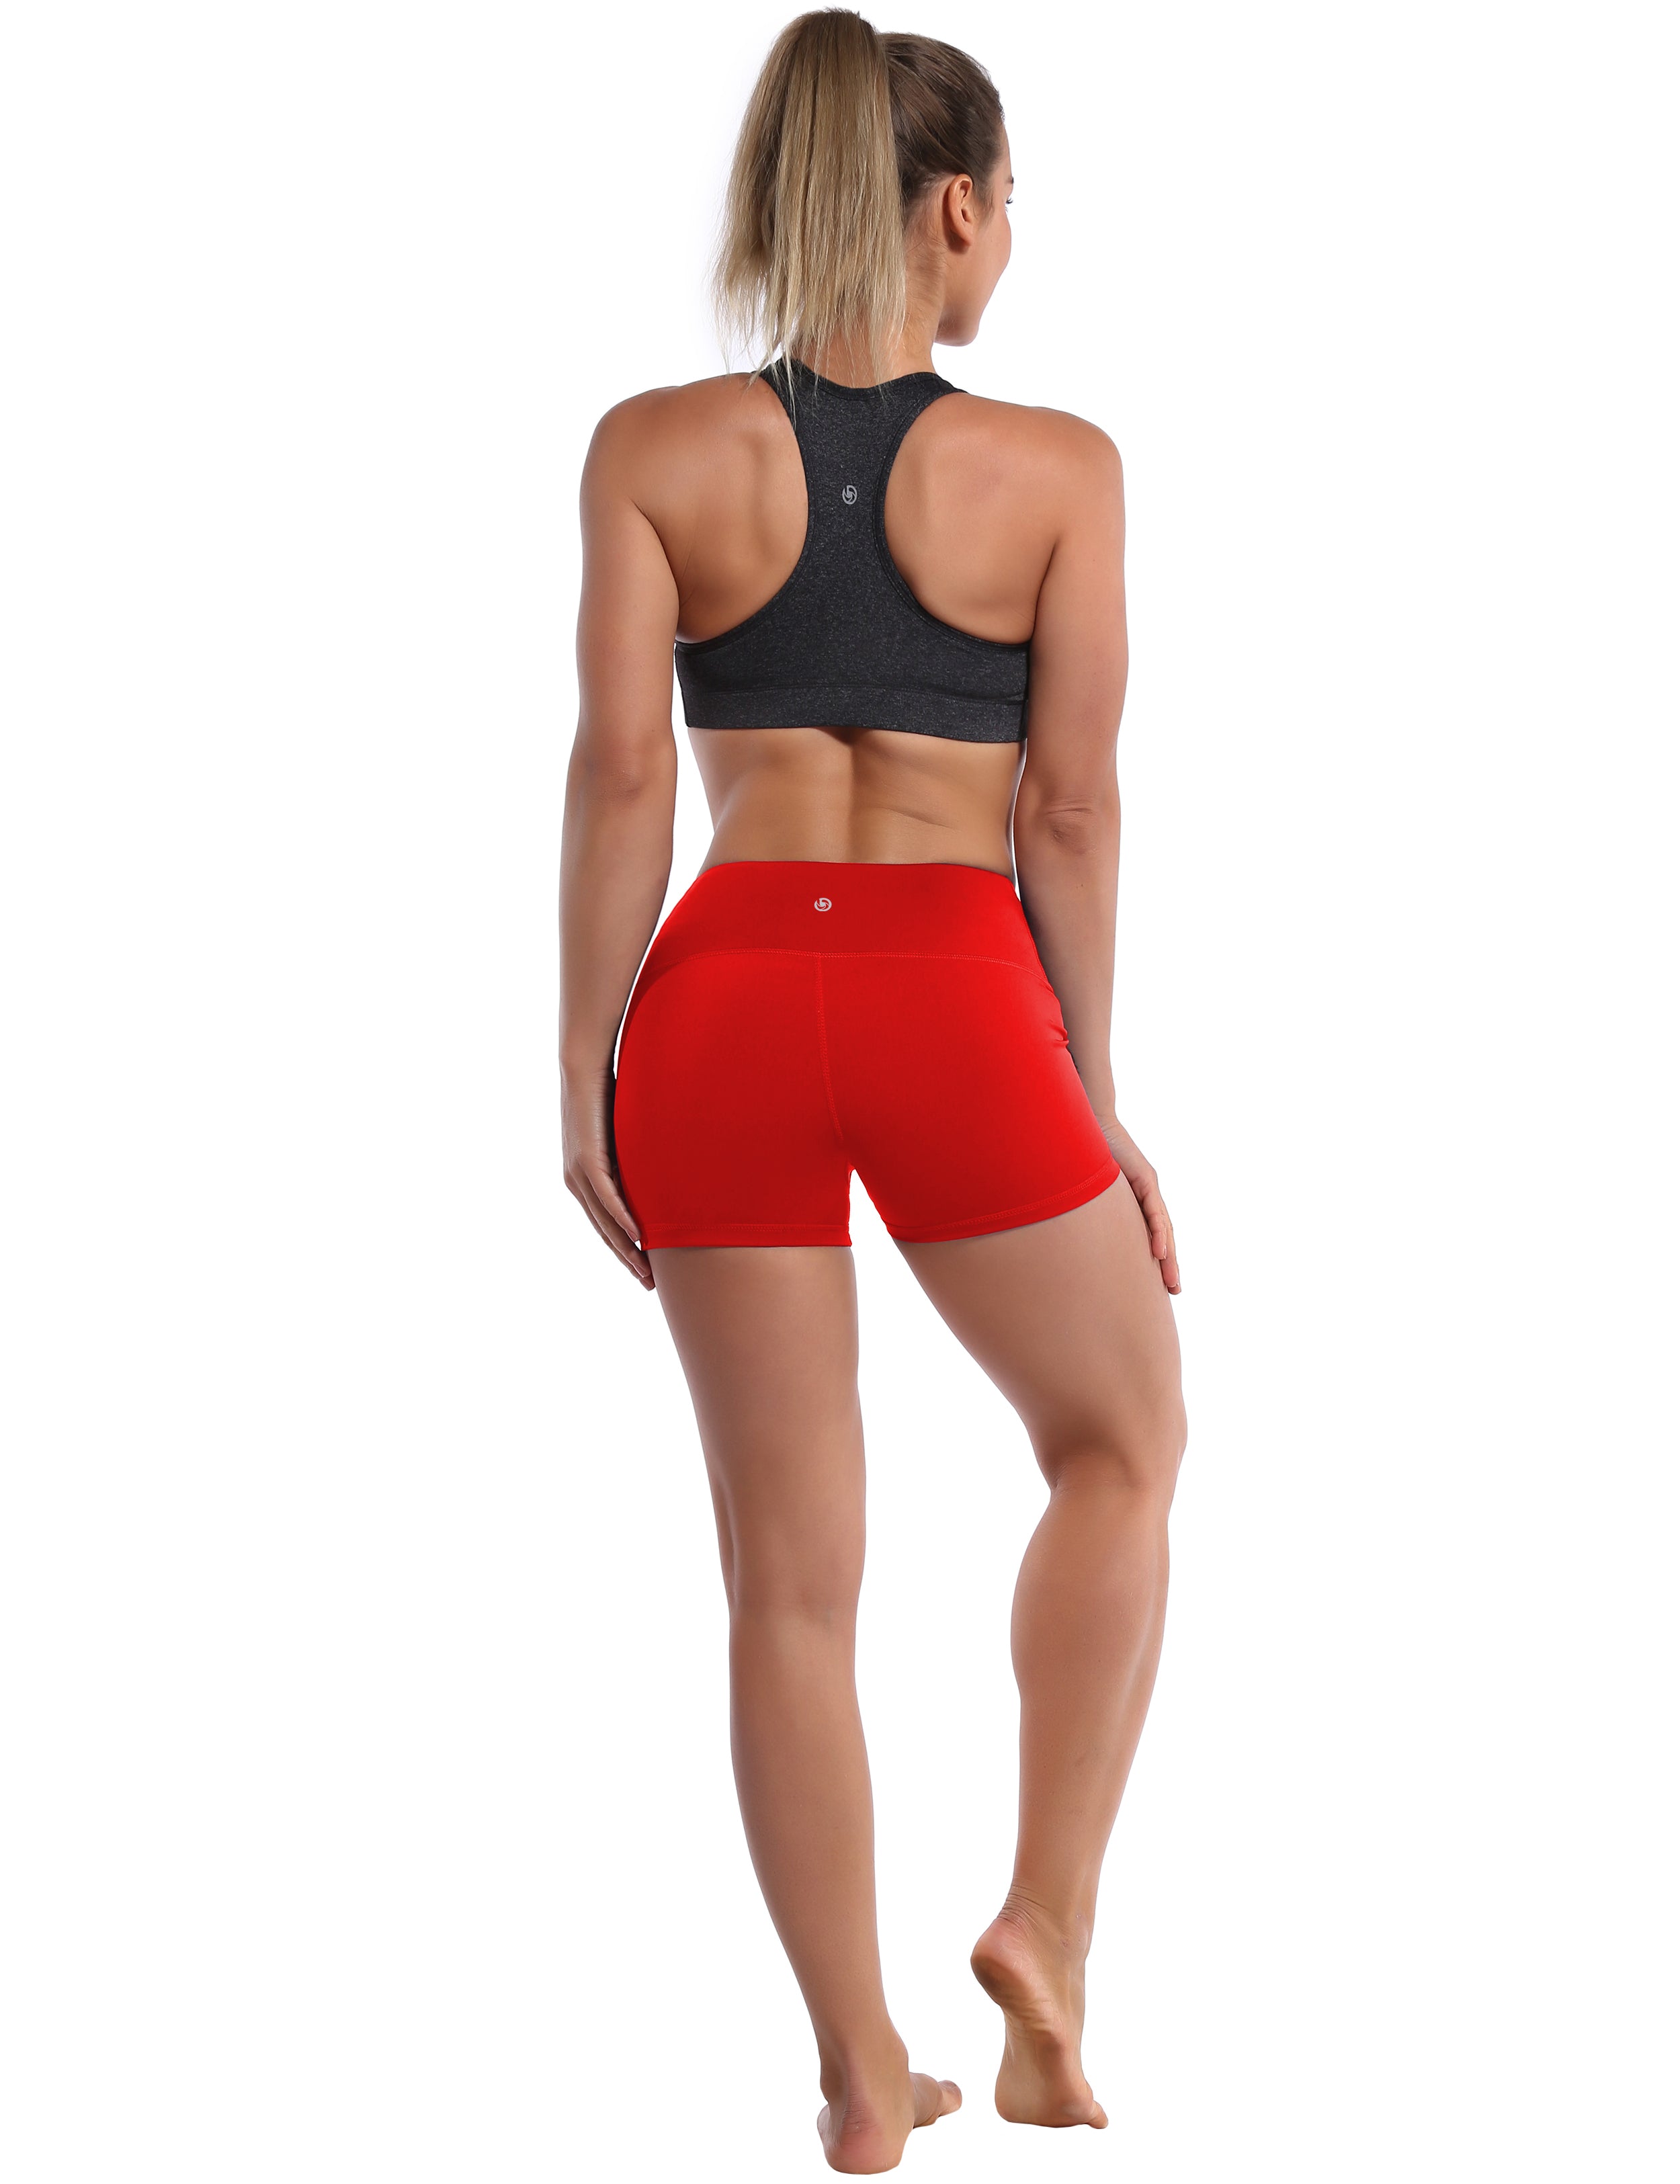 2.5" Gym Shorts scarlet Softest-ever fabric High elasticity High density 4-way stretch Fabric doesn't attract lint easily No see-through Moisture-wicking Machine wash 75% Nylon, 25% Spandex